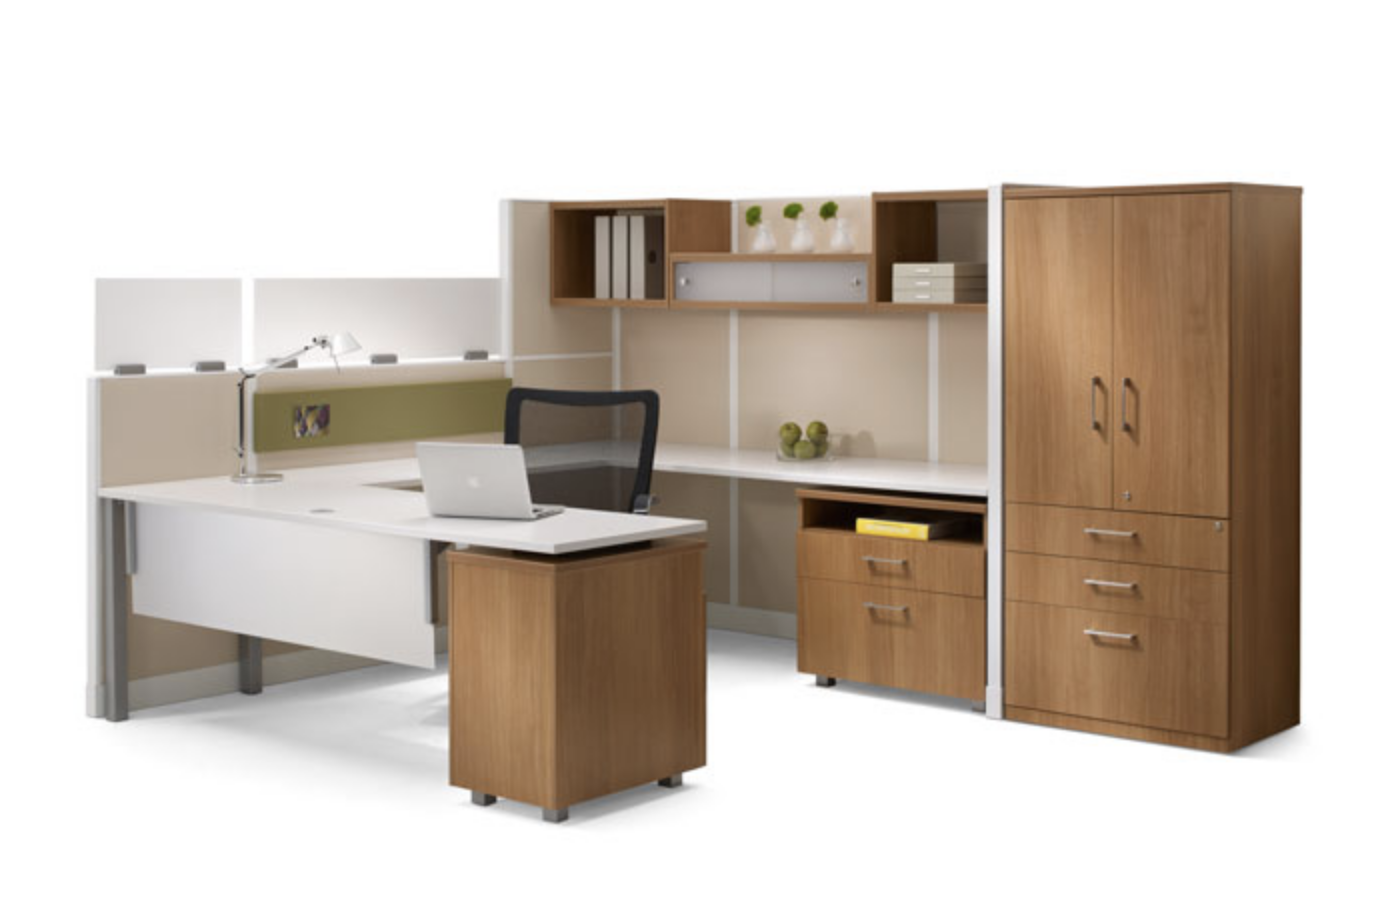 Trendway Choices:Trig Work Station 1